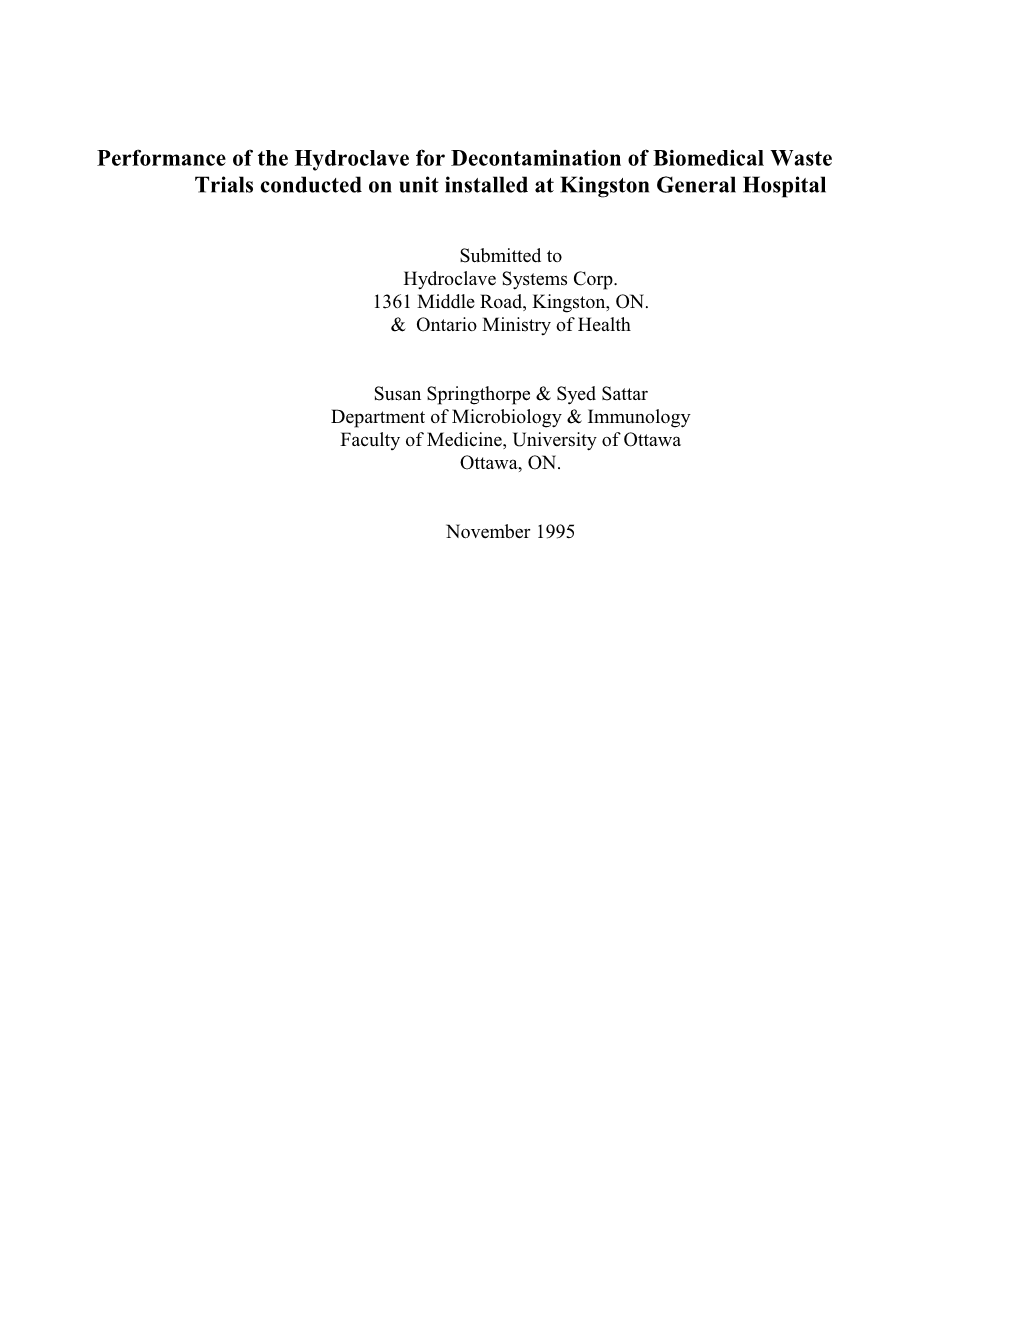 Performance of the Hydroclave for Decontamination of Biomedical Waste